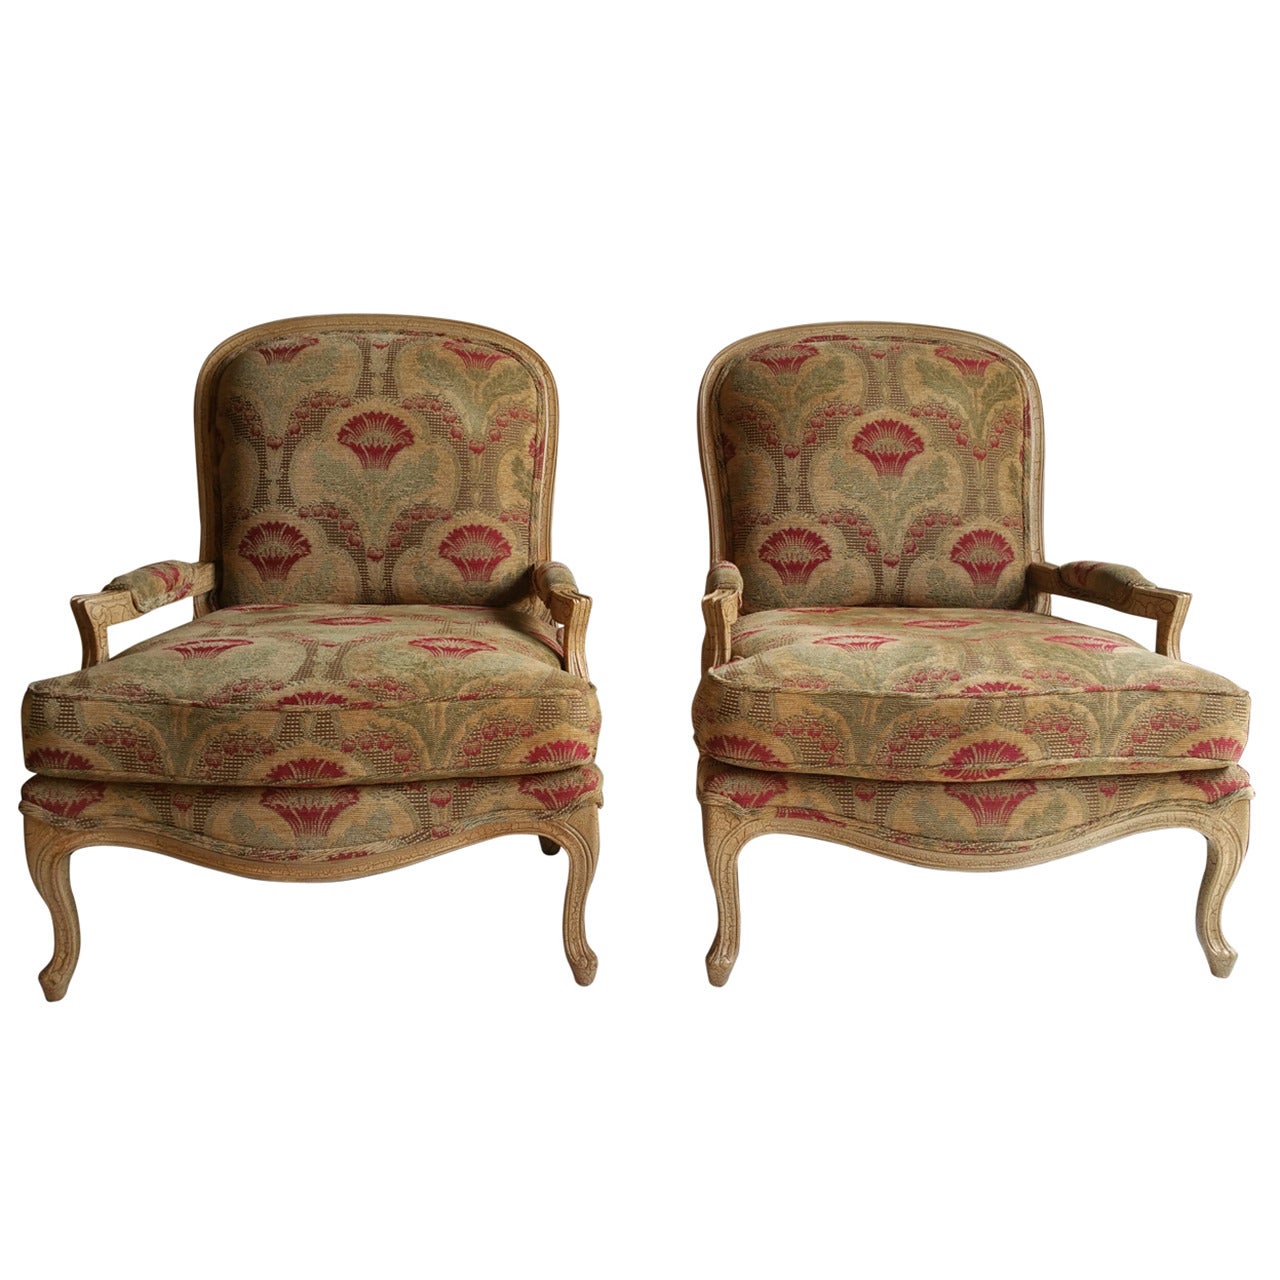 Oversized Pair of French Bergeres or Lounge Chairs, Drexel Heritage